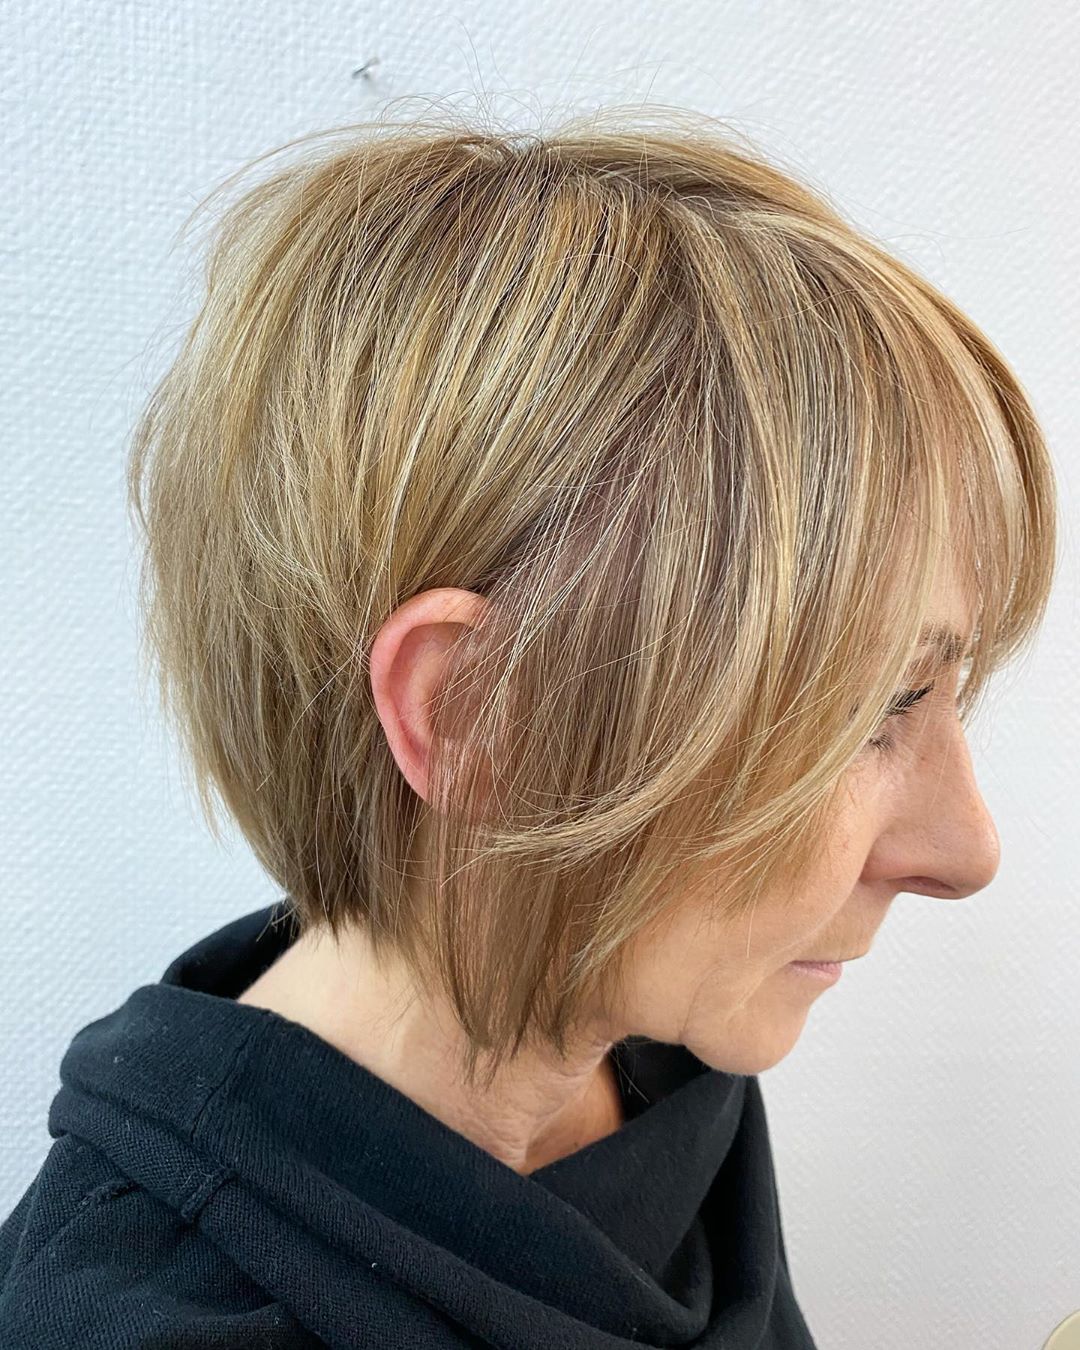 15 Slimming Short Hairstyles for Women Over 50 with Round Face Shapes